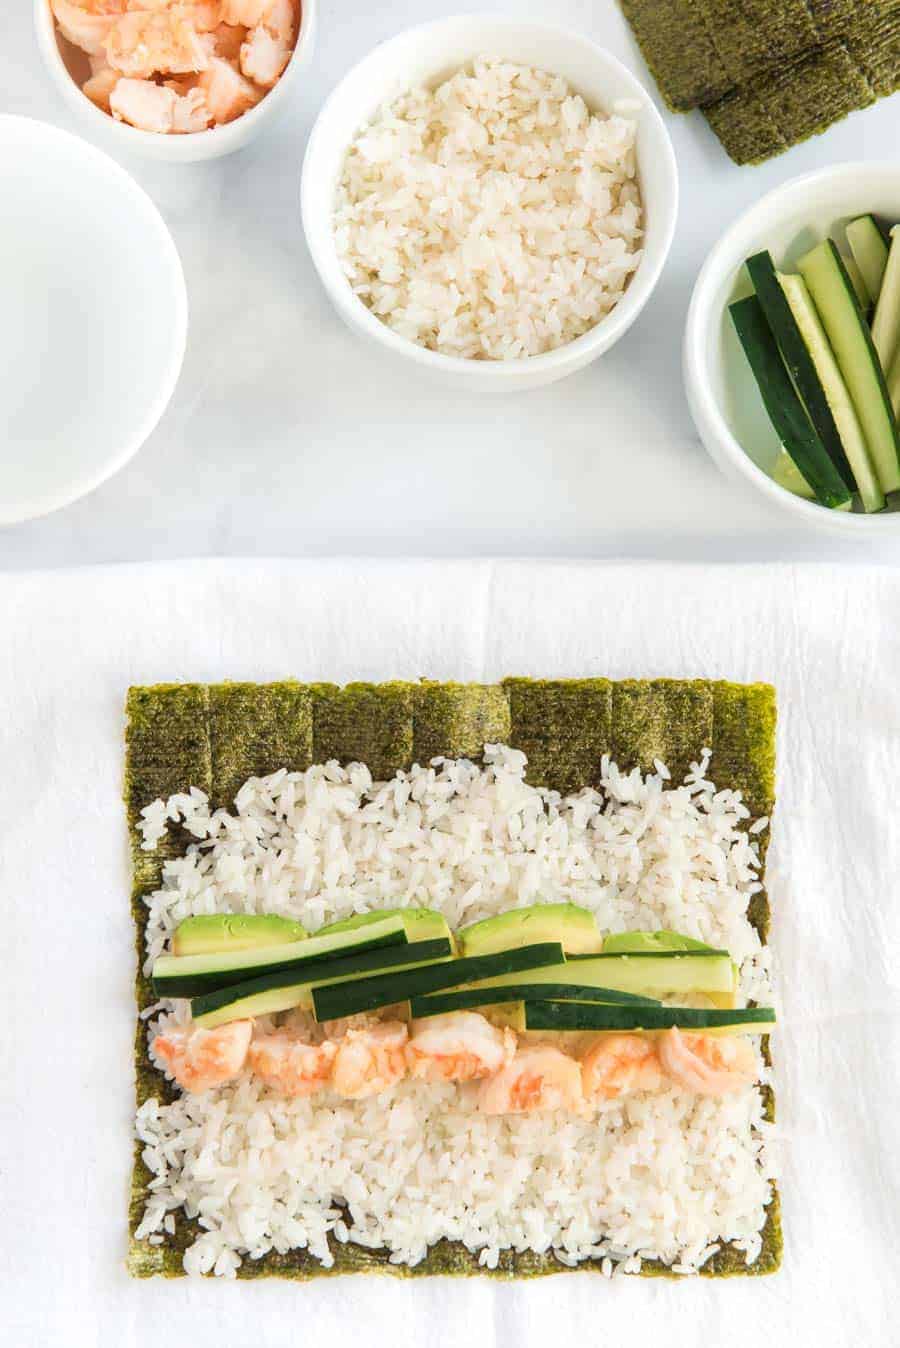 https://www.blessthismessplease.com/wp-content/uploads/2011/01/how-to-make-shrimp-sushi-at-home-4-of-10.jpg